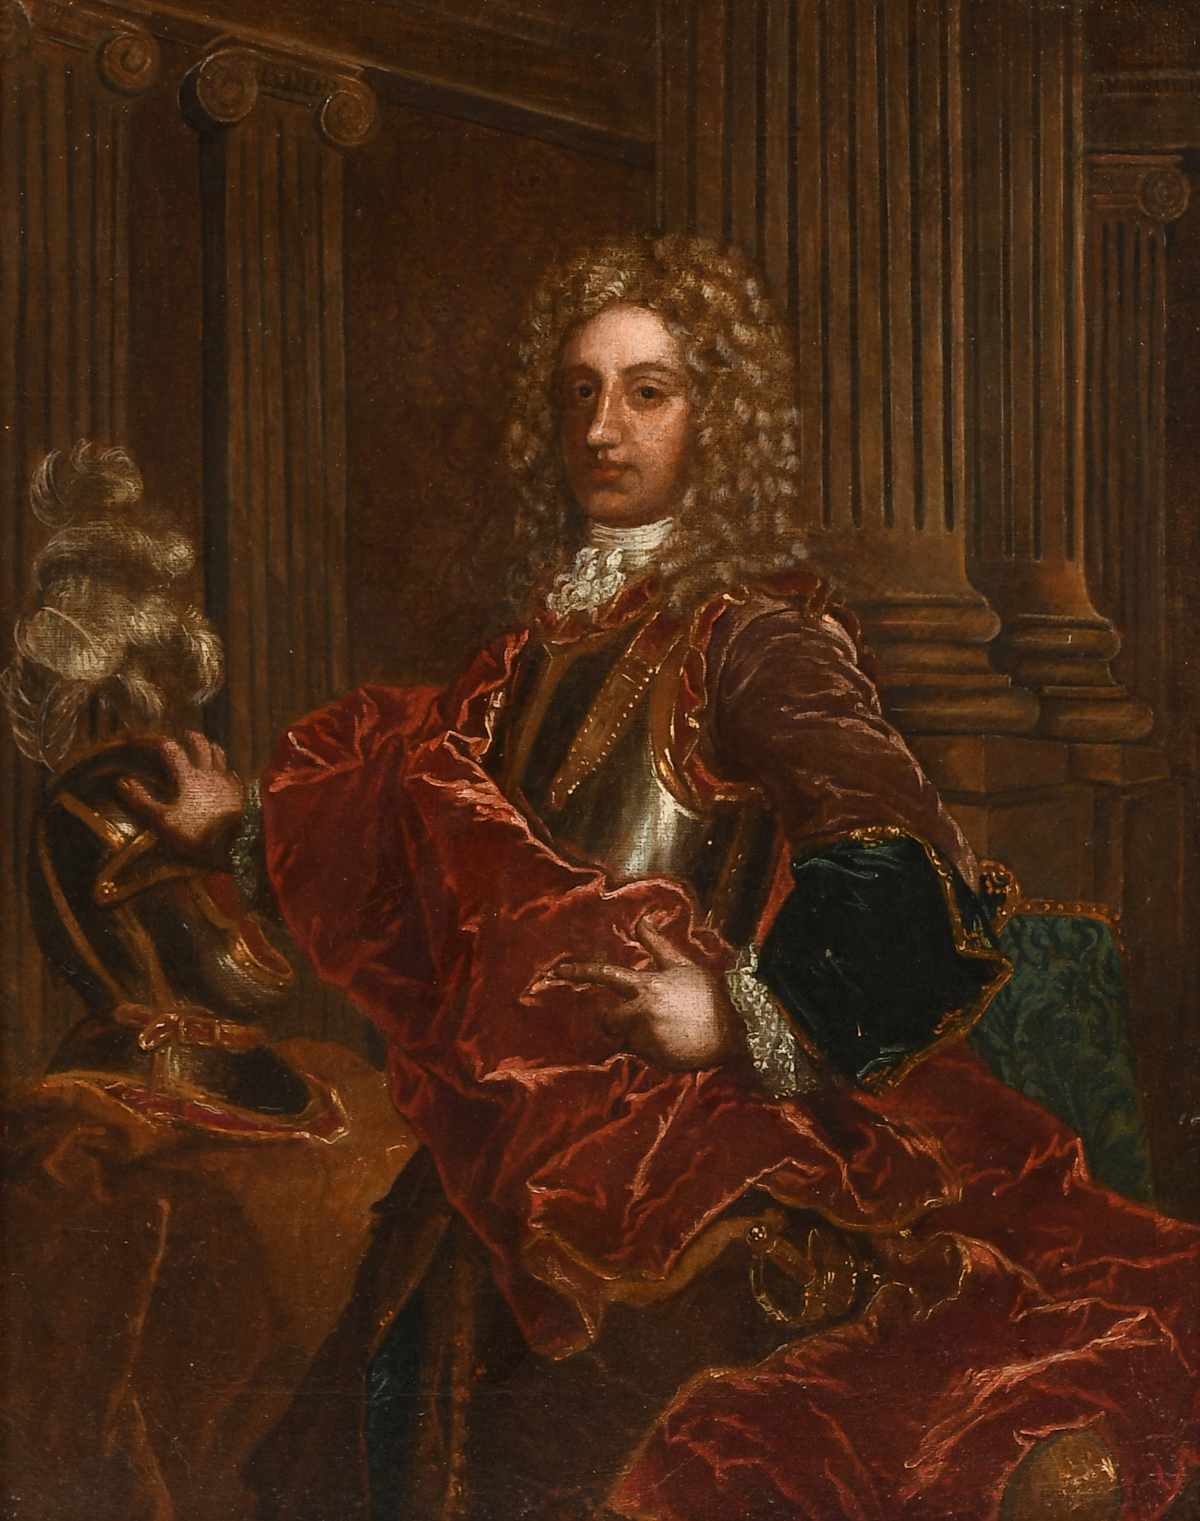 EARLY PORTRAIT PAINTING OF A EUROPEAN